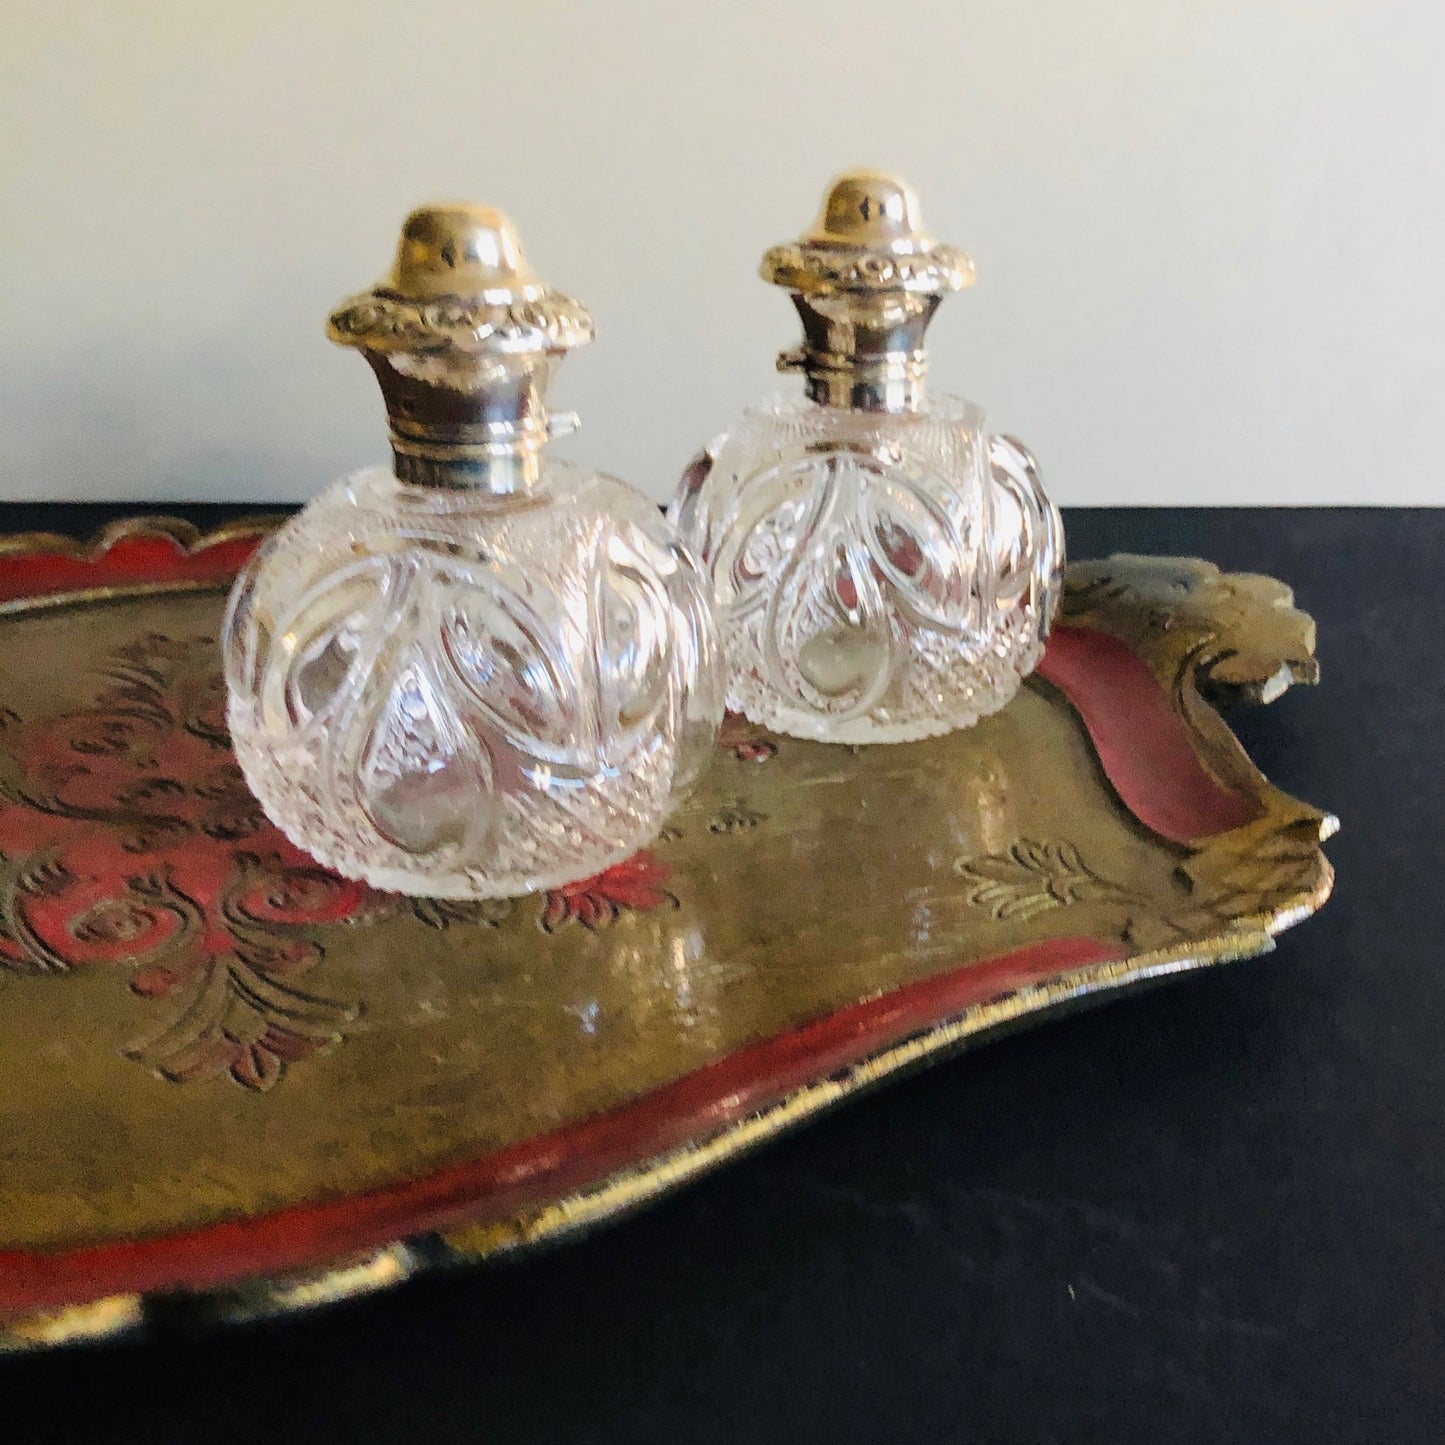 The Artist Peyton - Pair of Antique Silver Topped Perfume Bottles